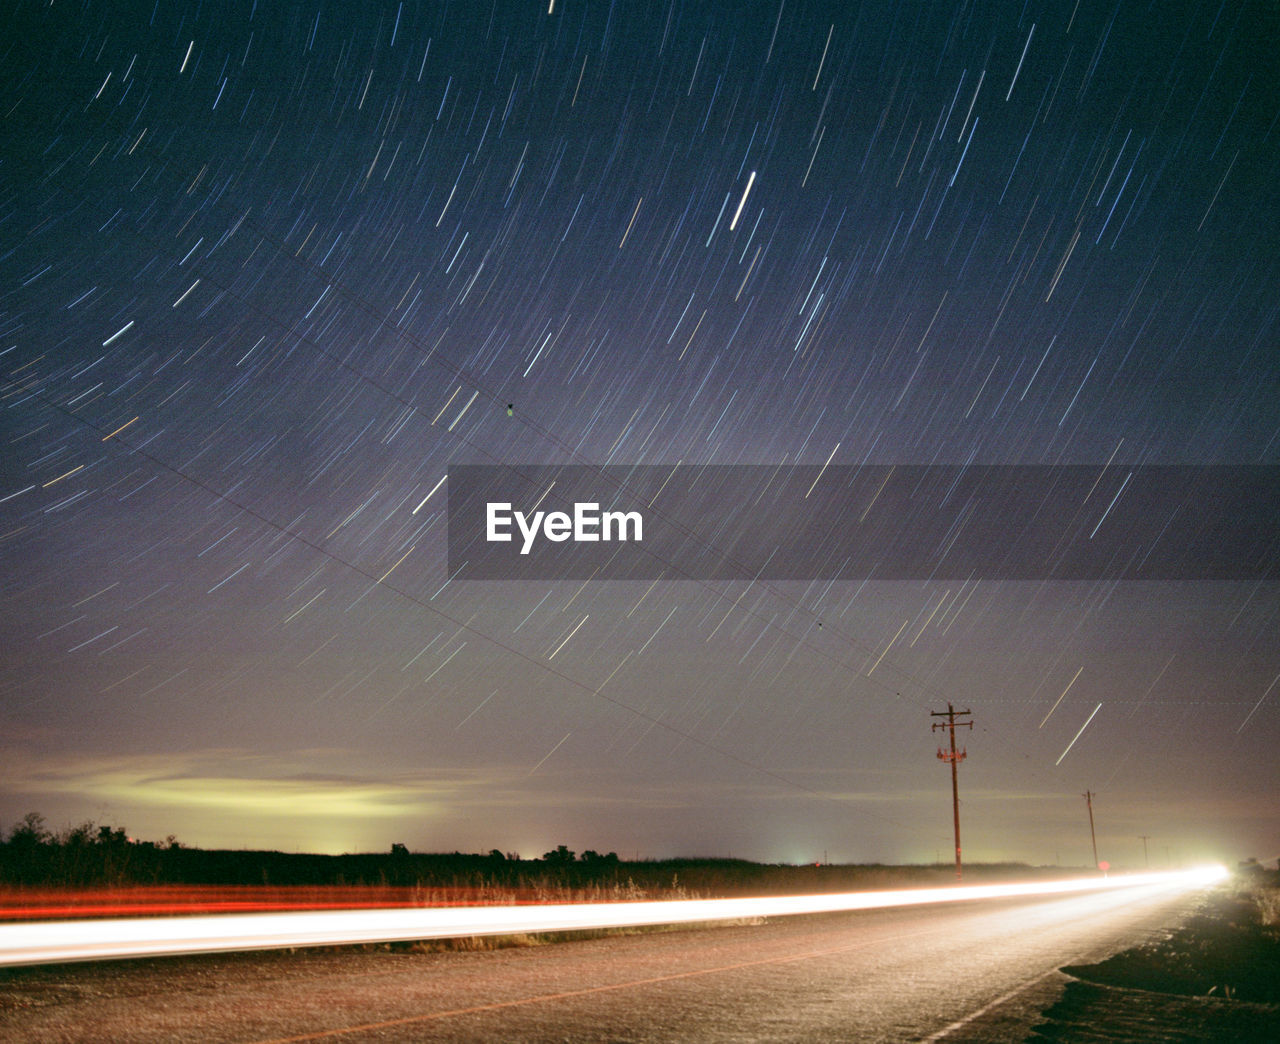 Star trails above road with long exposure car and telephone pole